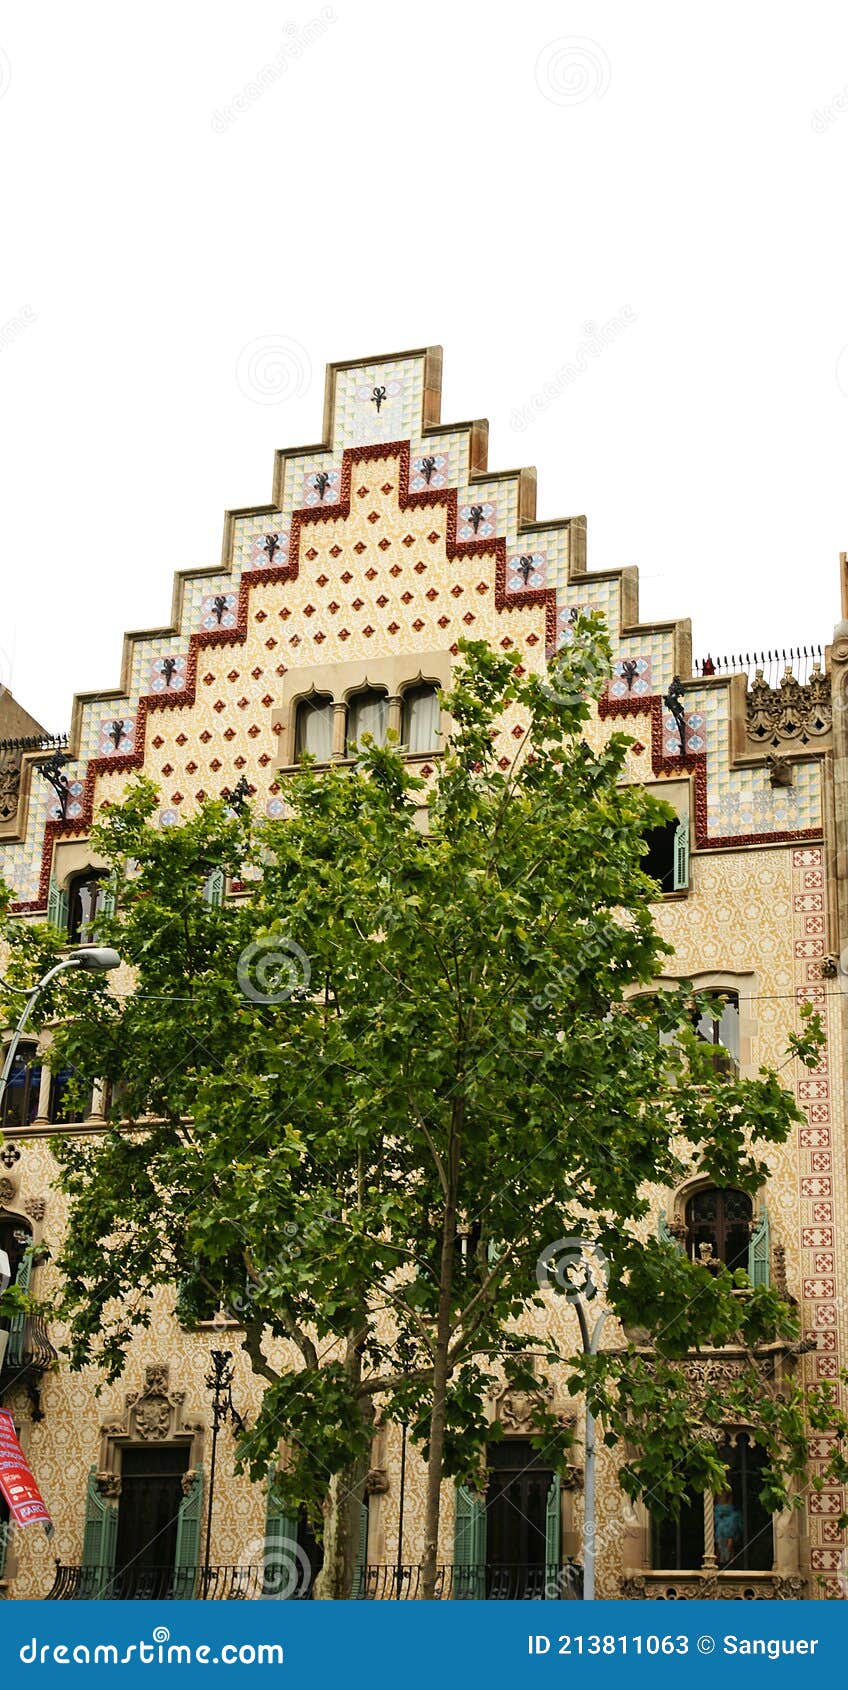 architectural detail of the upper part of the facade of the casa ametller on paseo de gracia in barcelona